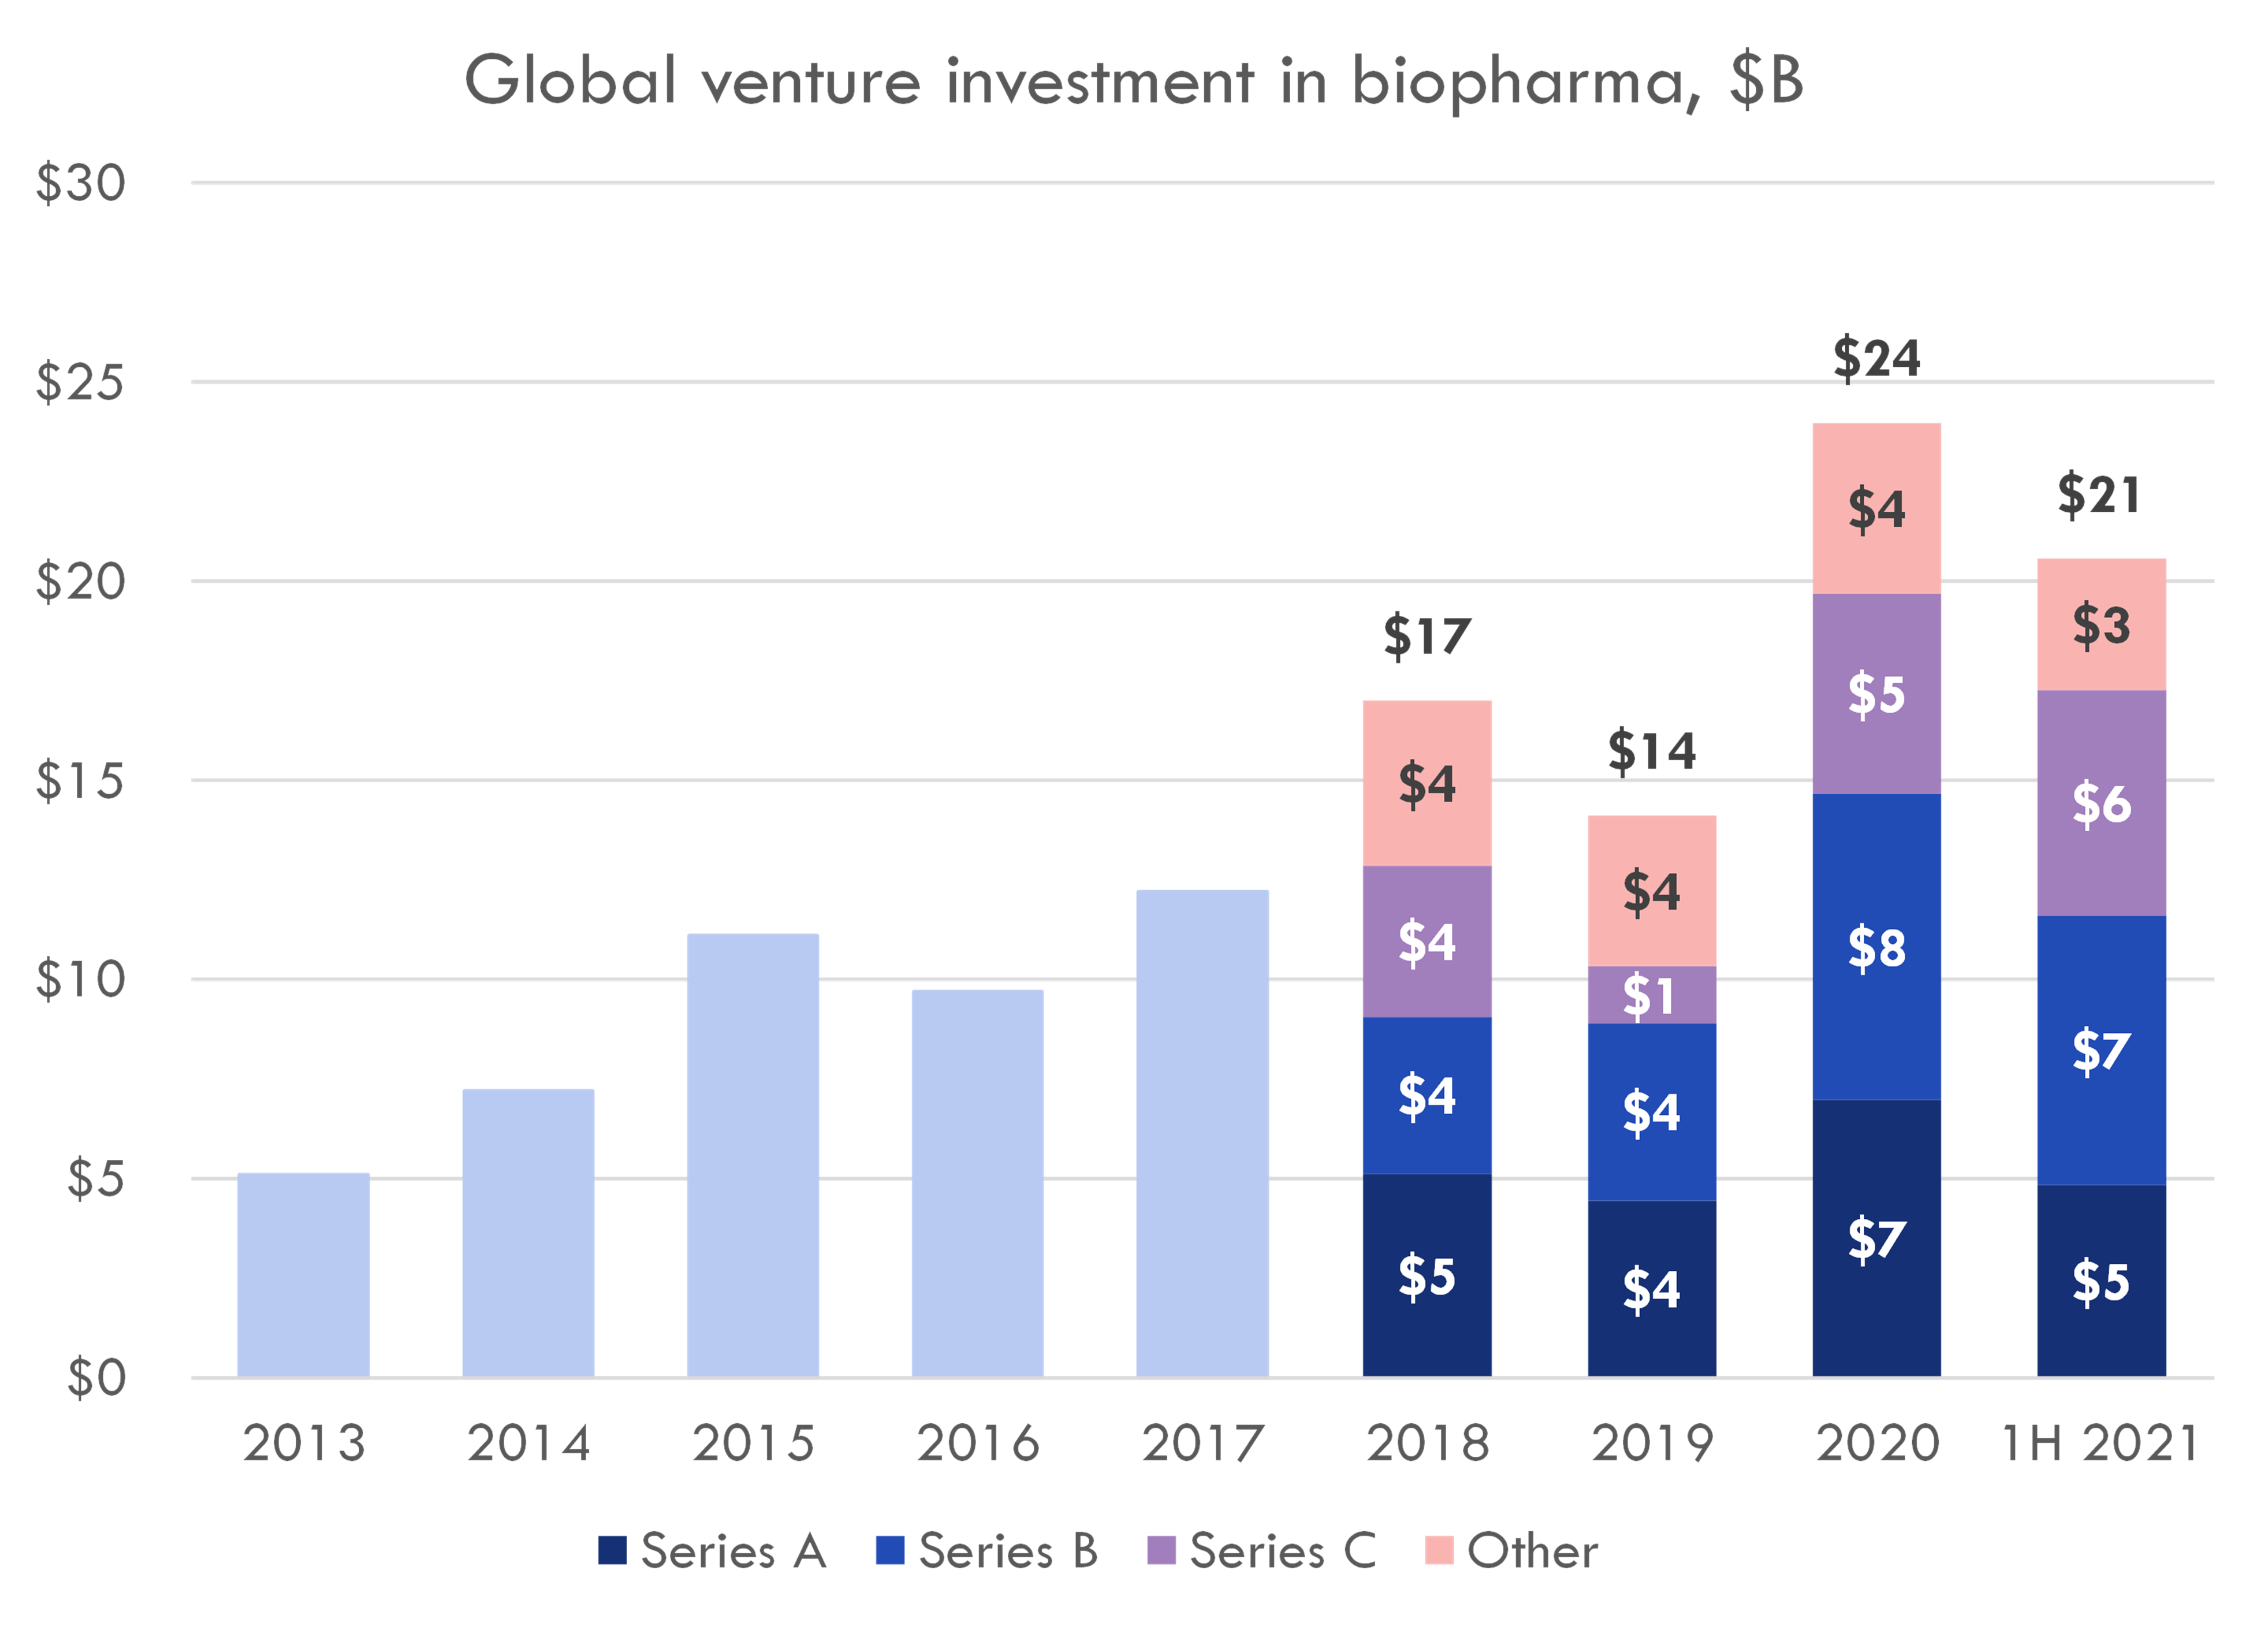 Top biotech venture funds, 2018, 2019 and 2020